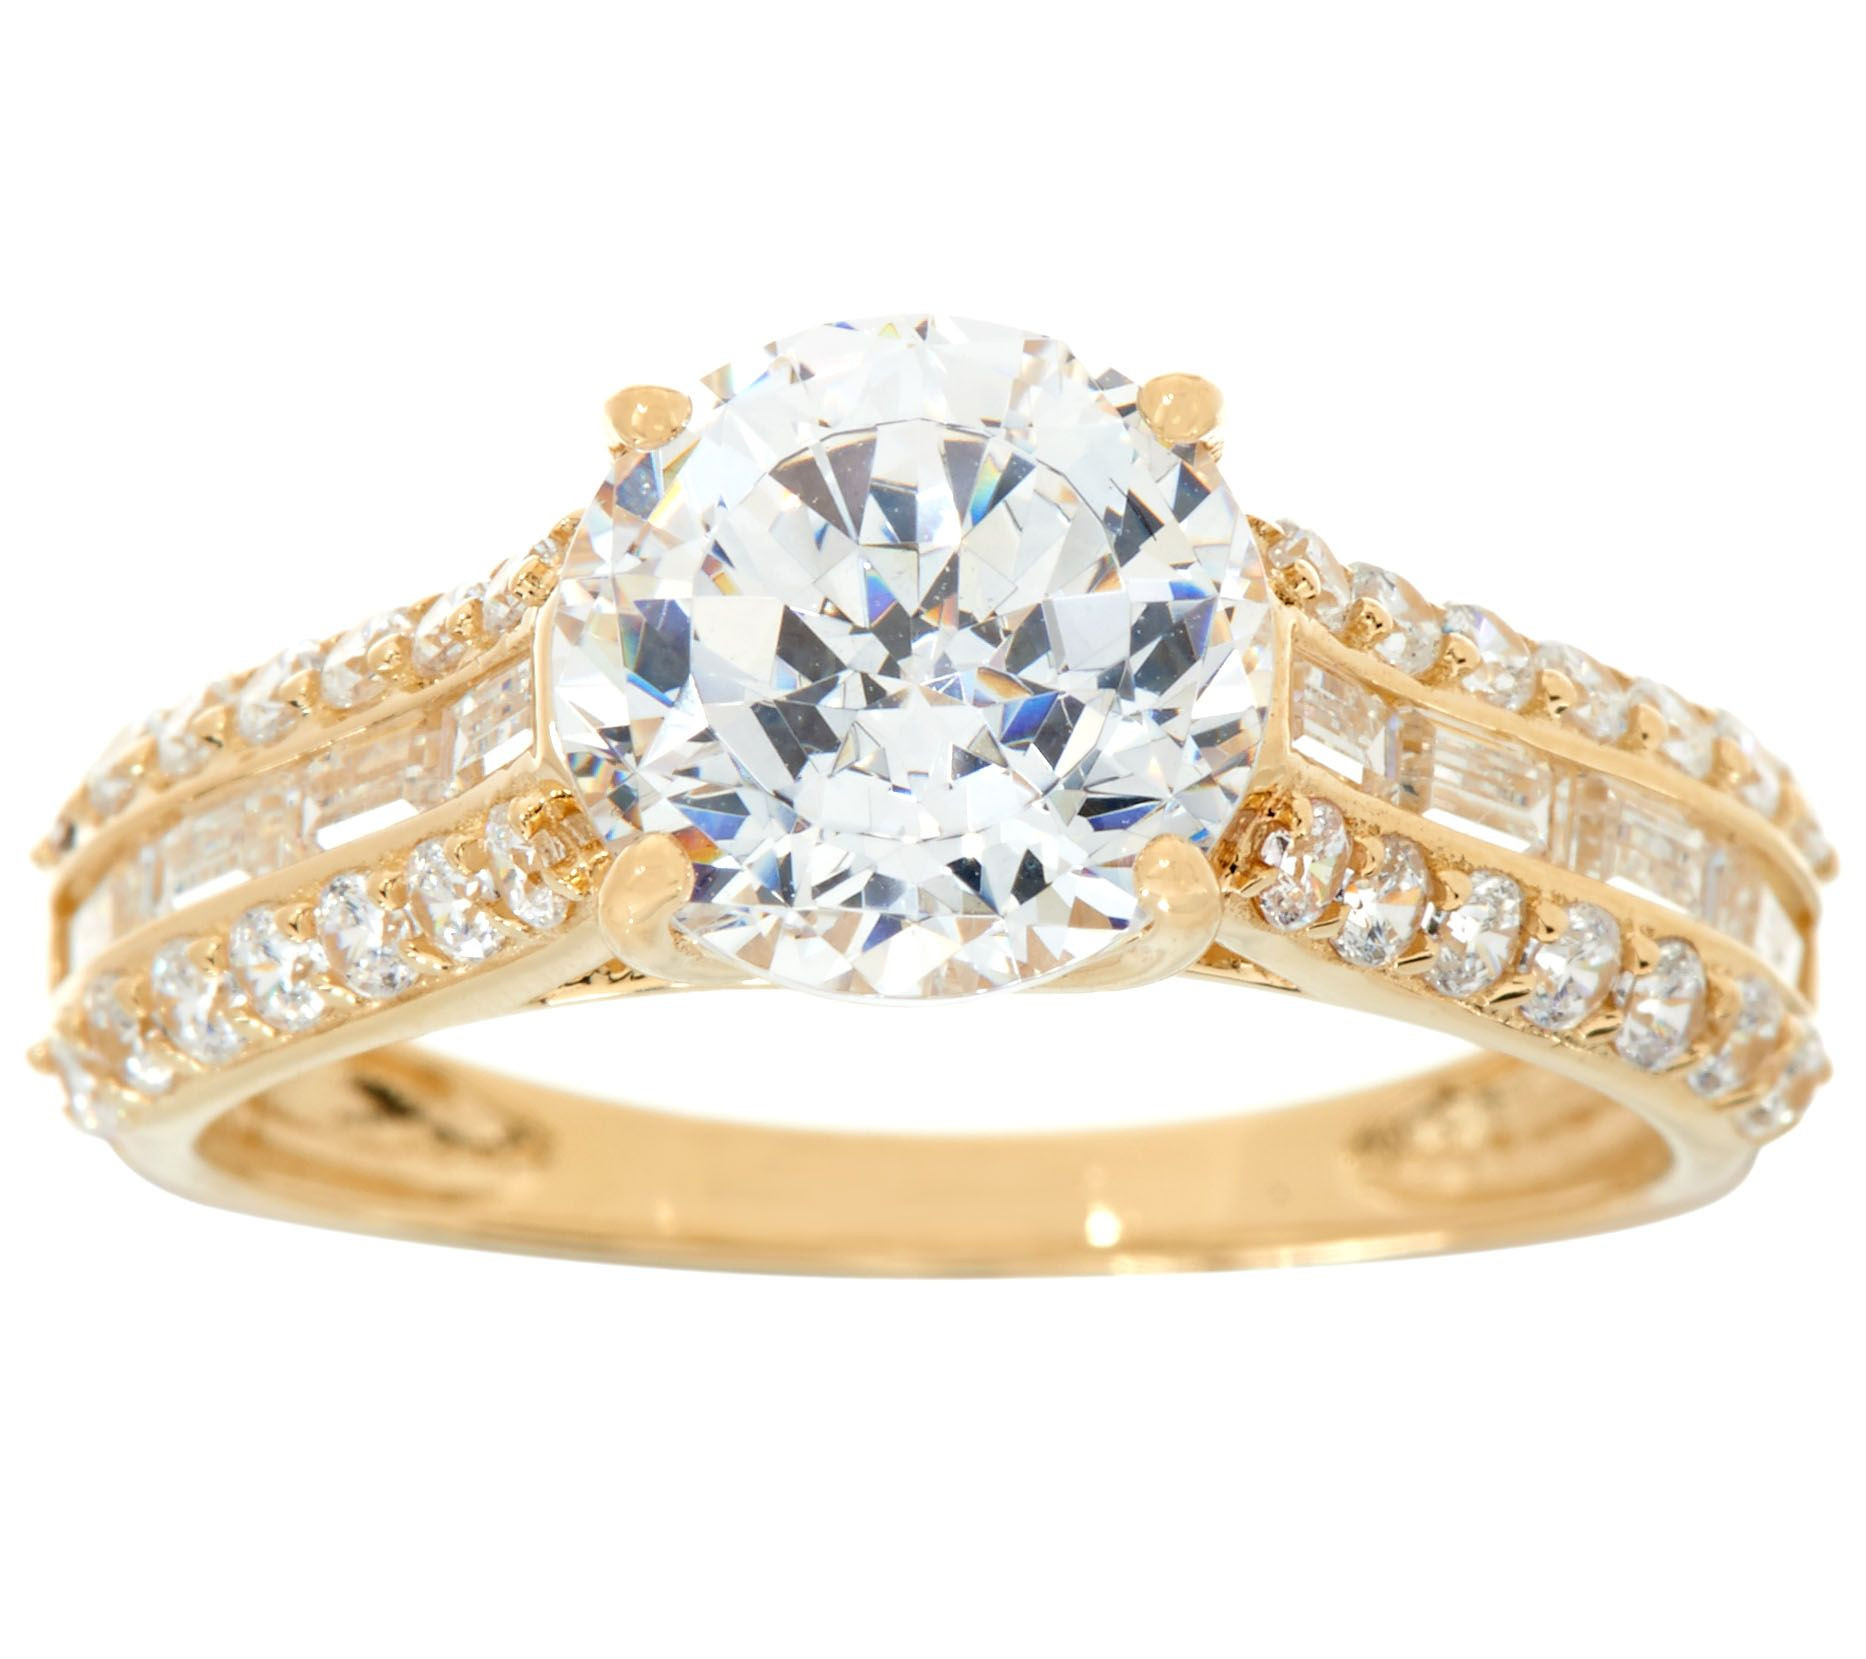 Qvc Wedding Rings
 Diamonique Round and Baguette Bridal Ring 14K Gold Page